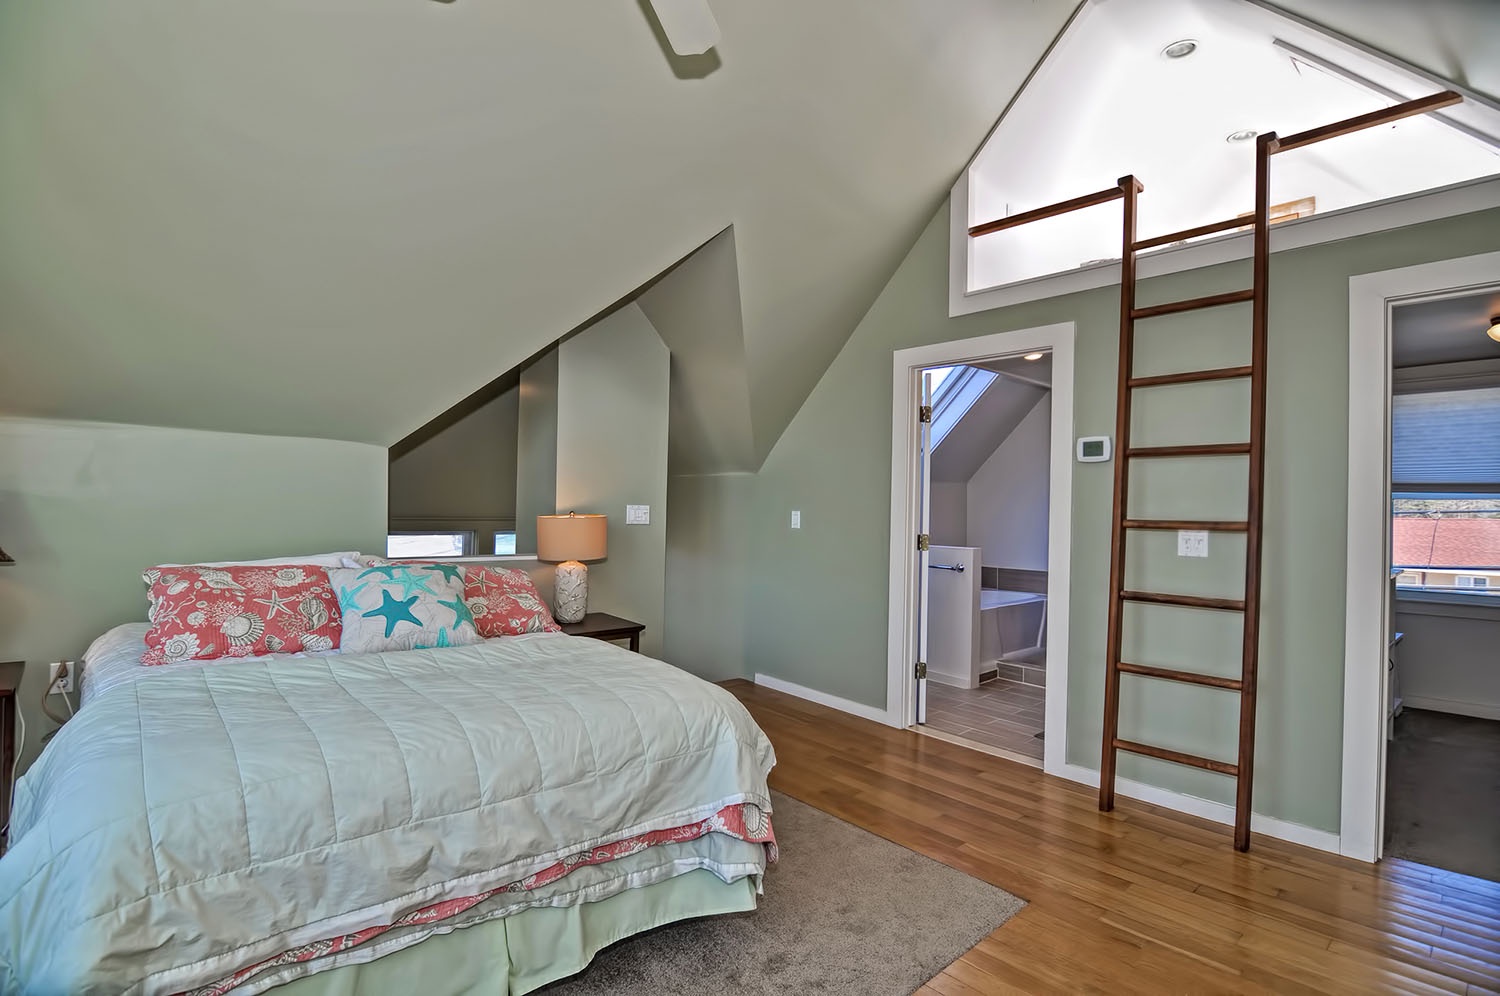 The upper Primary suite has a built-in loft.